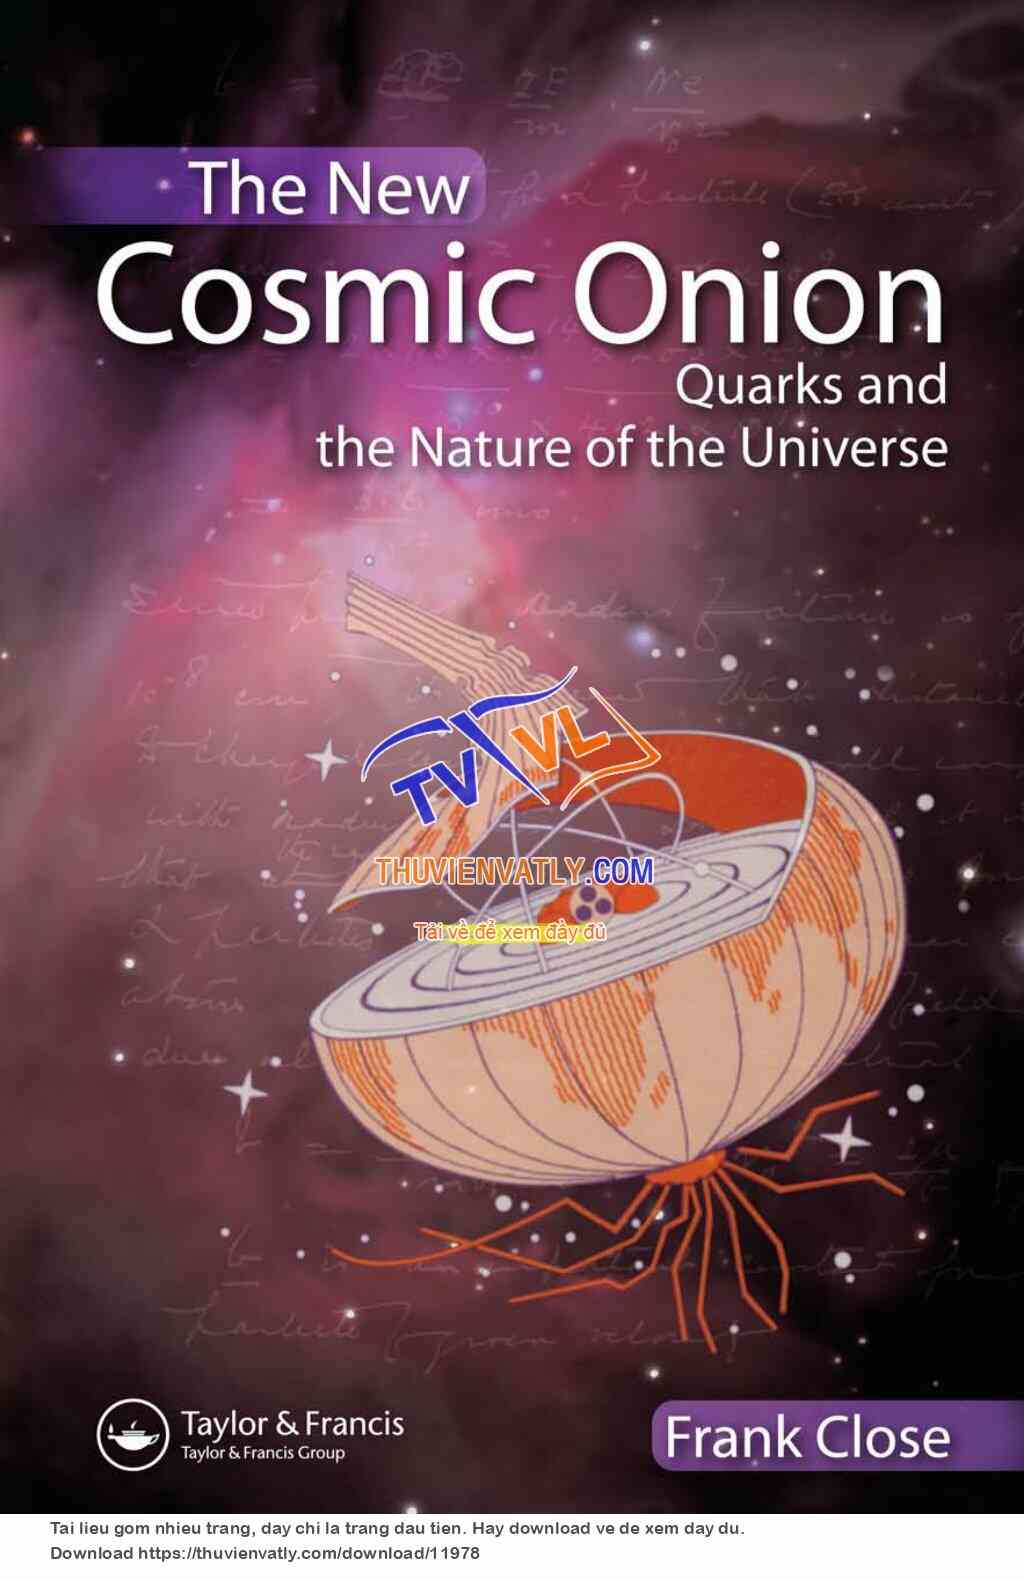 The New Cosmic Onion - Quarks and the Nature of the Universe